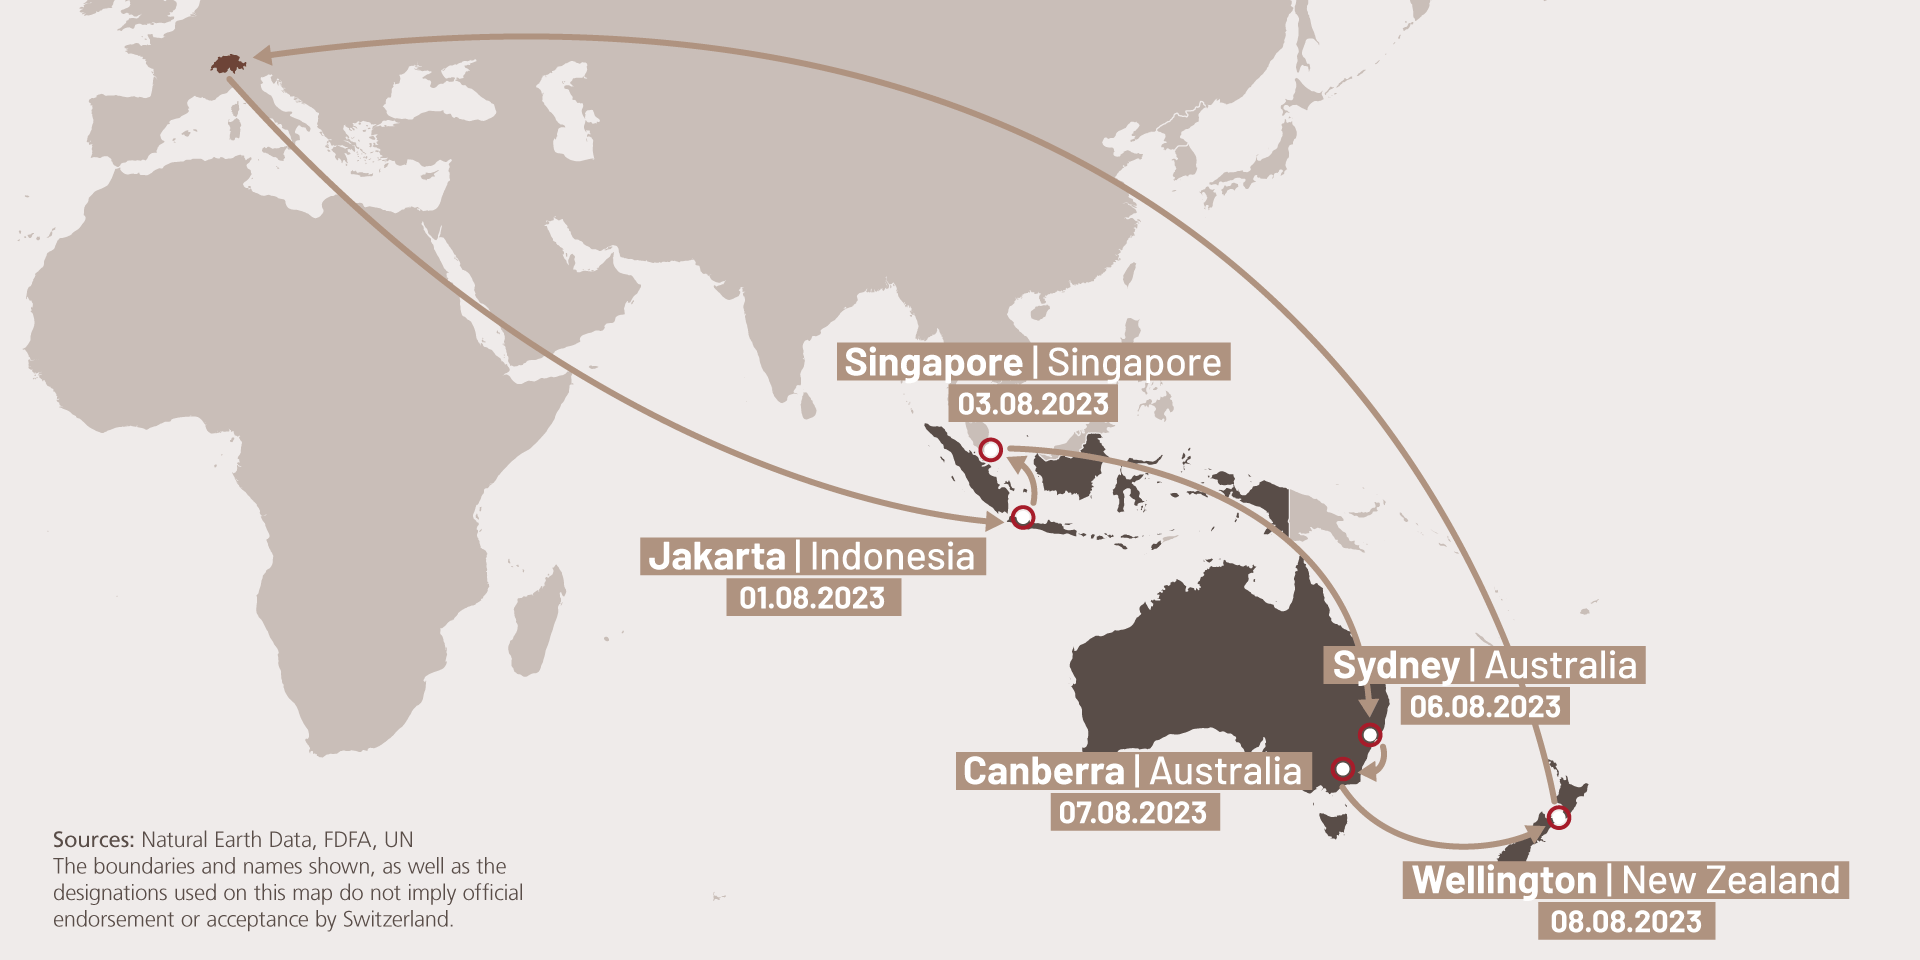 Infographic depicting the stages of Ignazio Cassis' journey to Indonesia, Singapore, Australia and New Zealand.